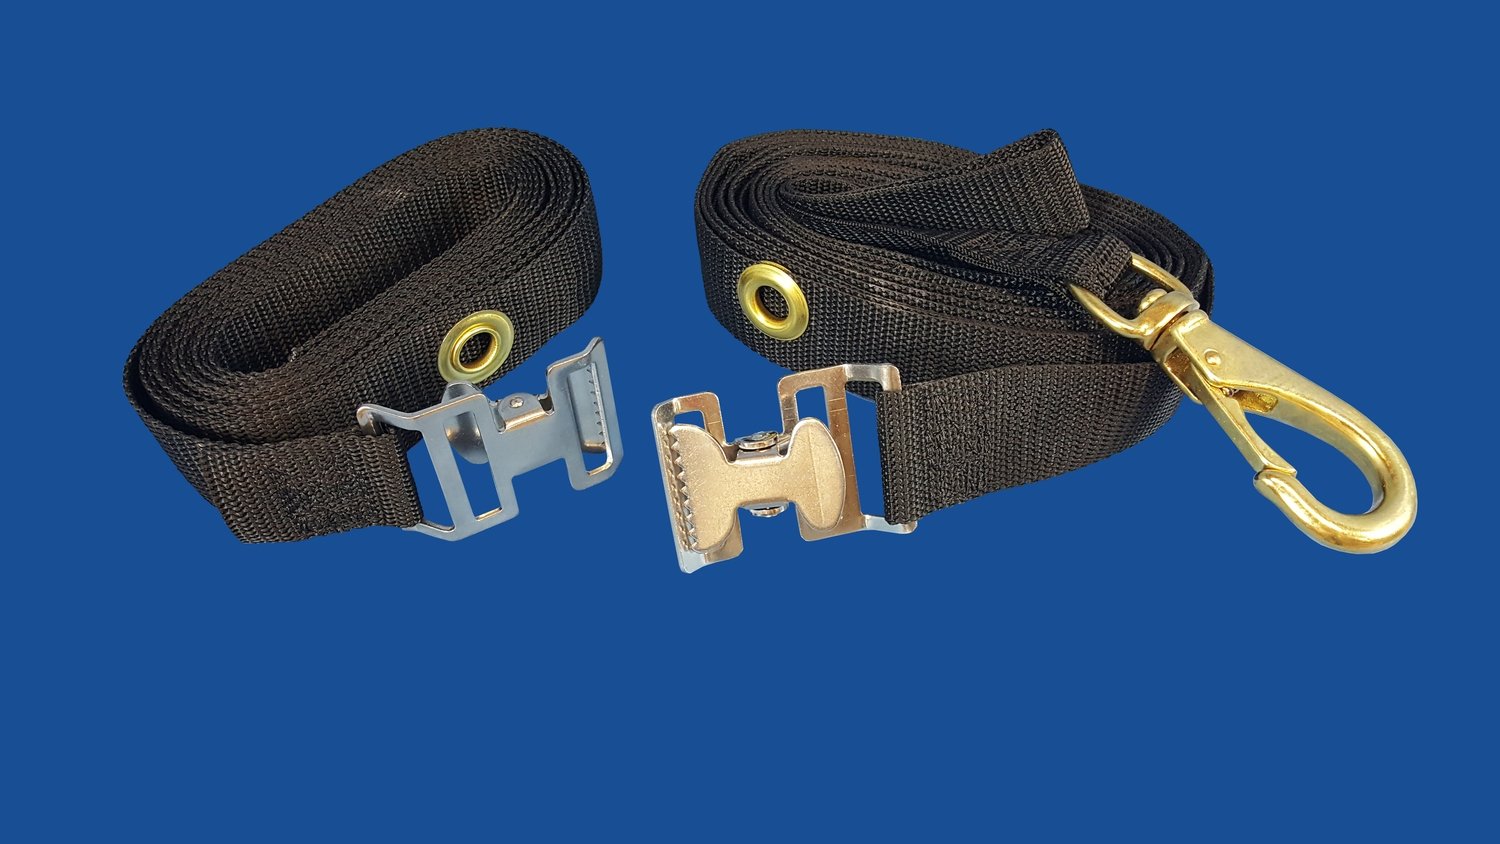 Strap Set - Replacement Bucket Cover Strap Set for PLASTIC Two Man